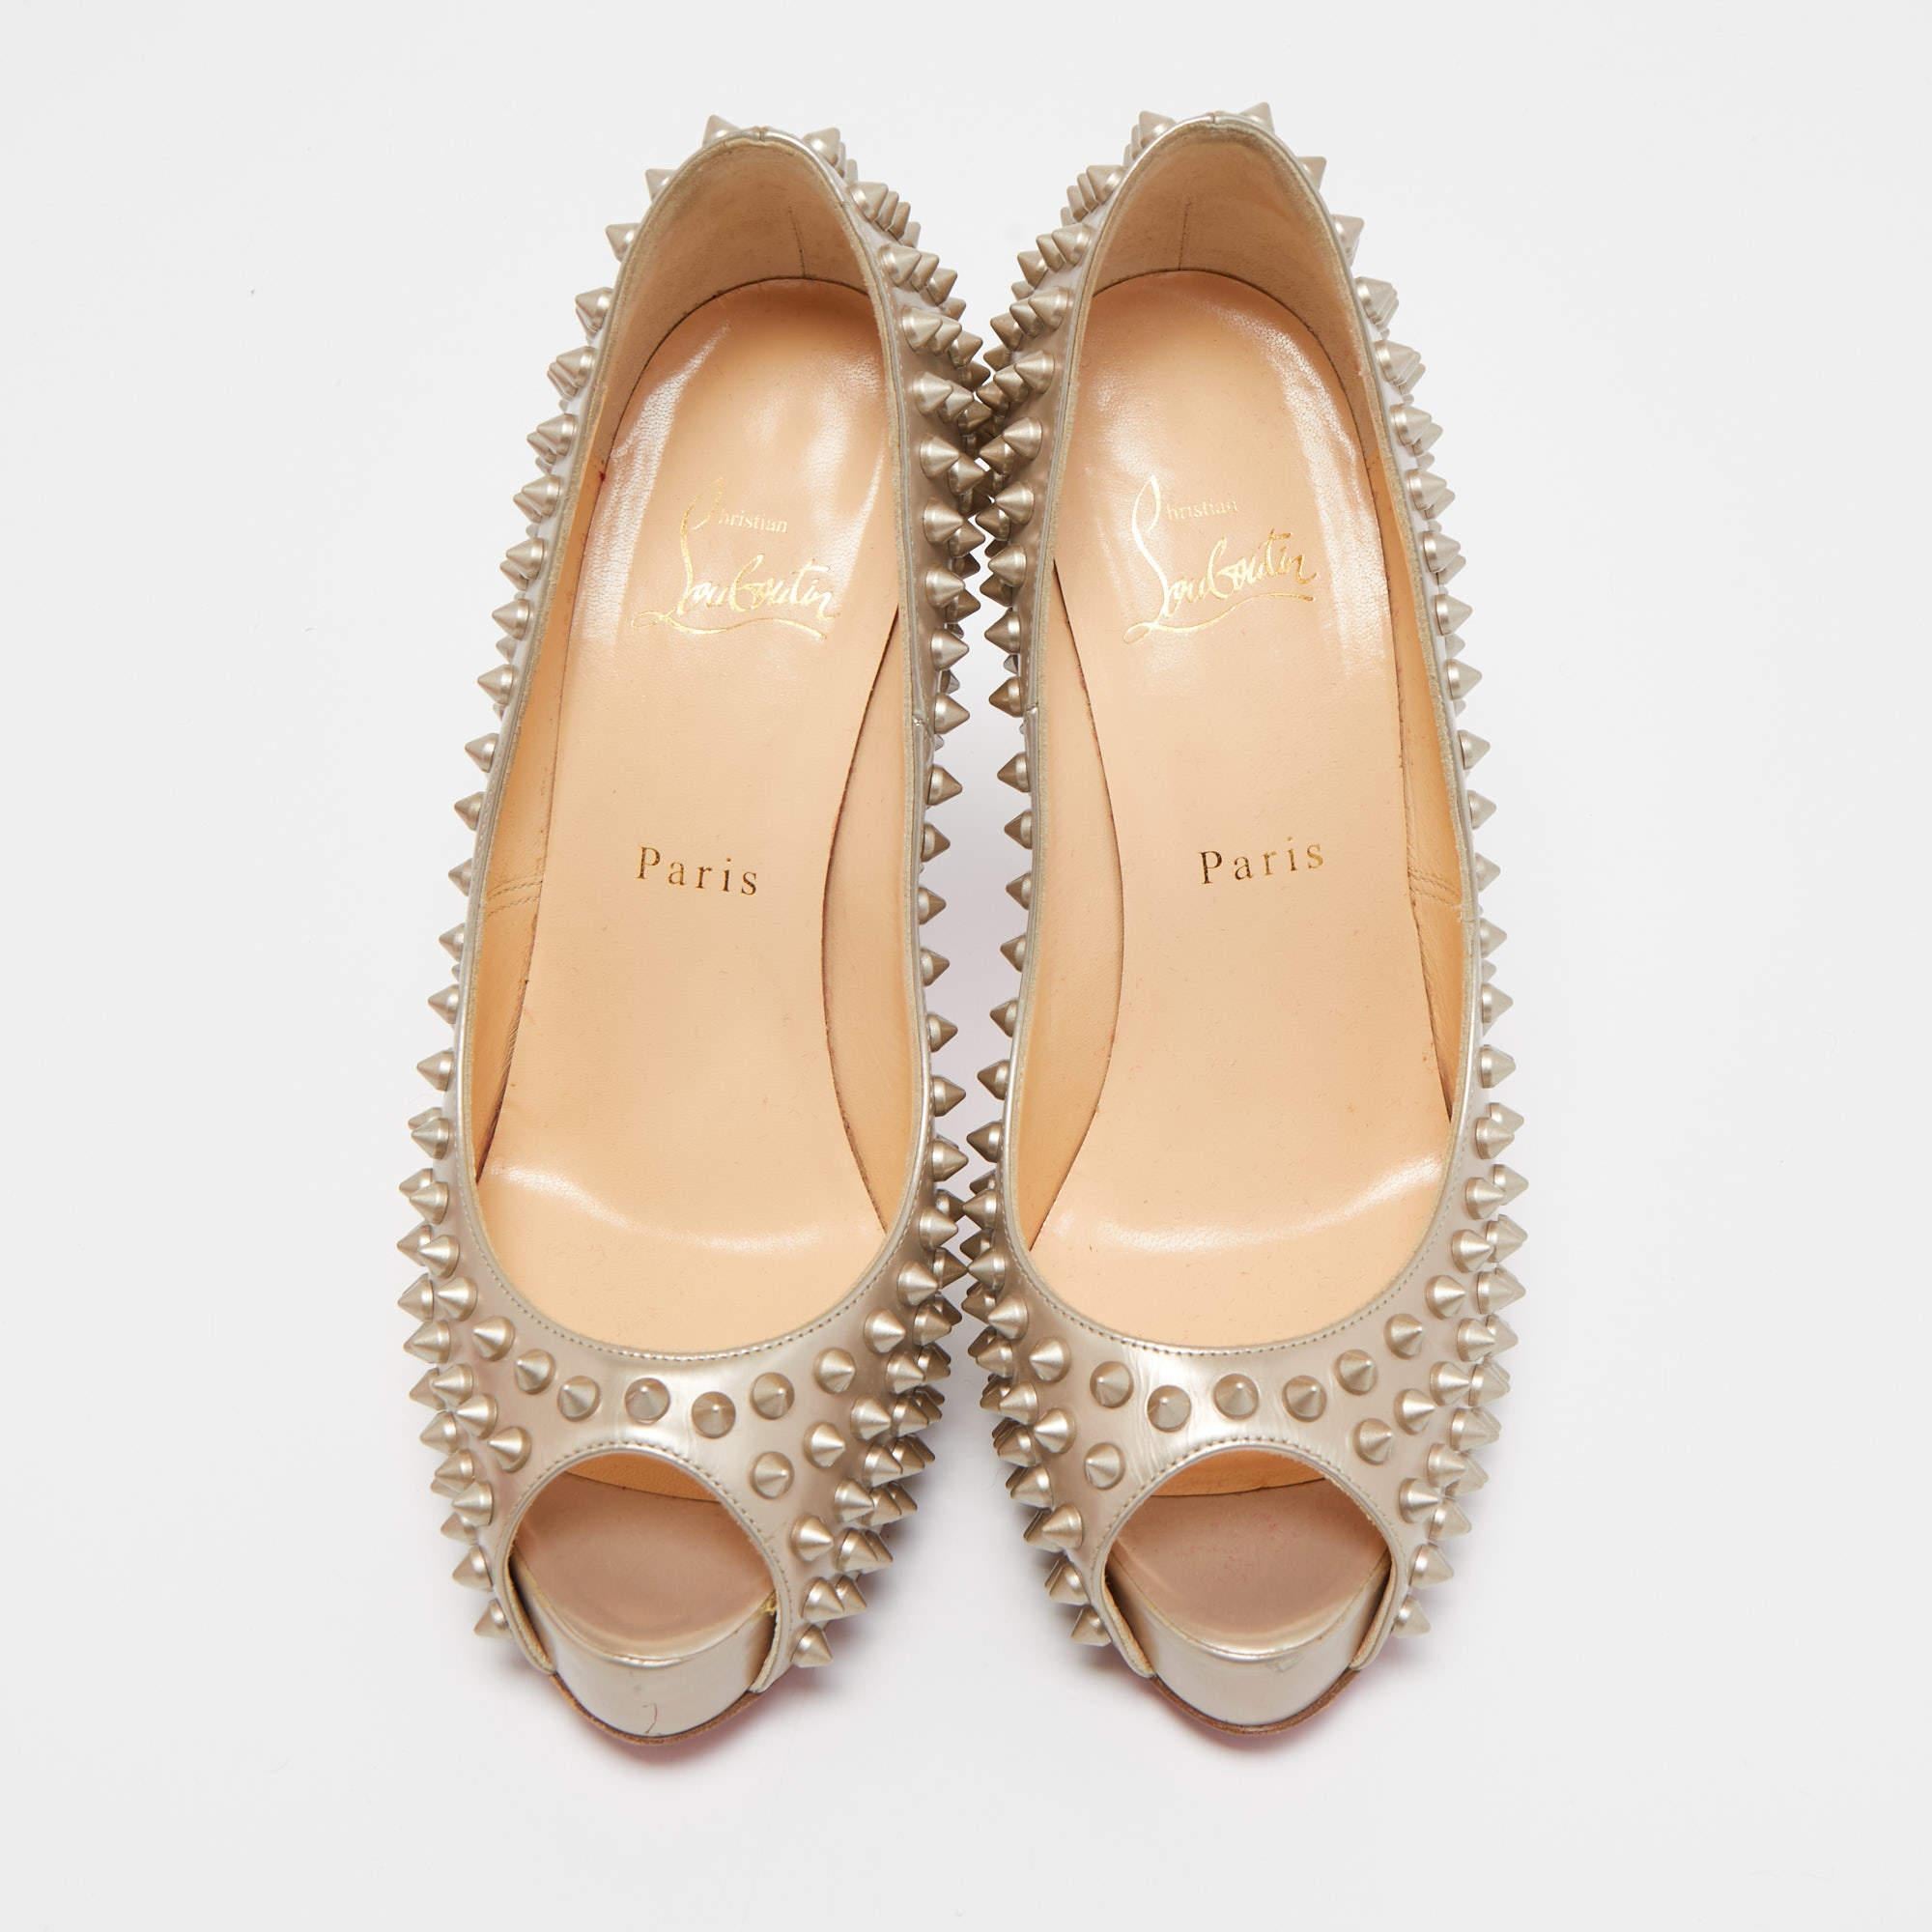 Christian Louboutin Beige Leather Very Prive Spike Pumps Size 37.5 For Sale 1